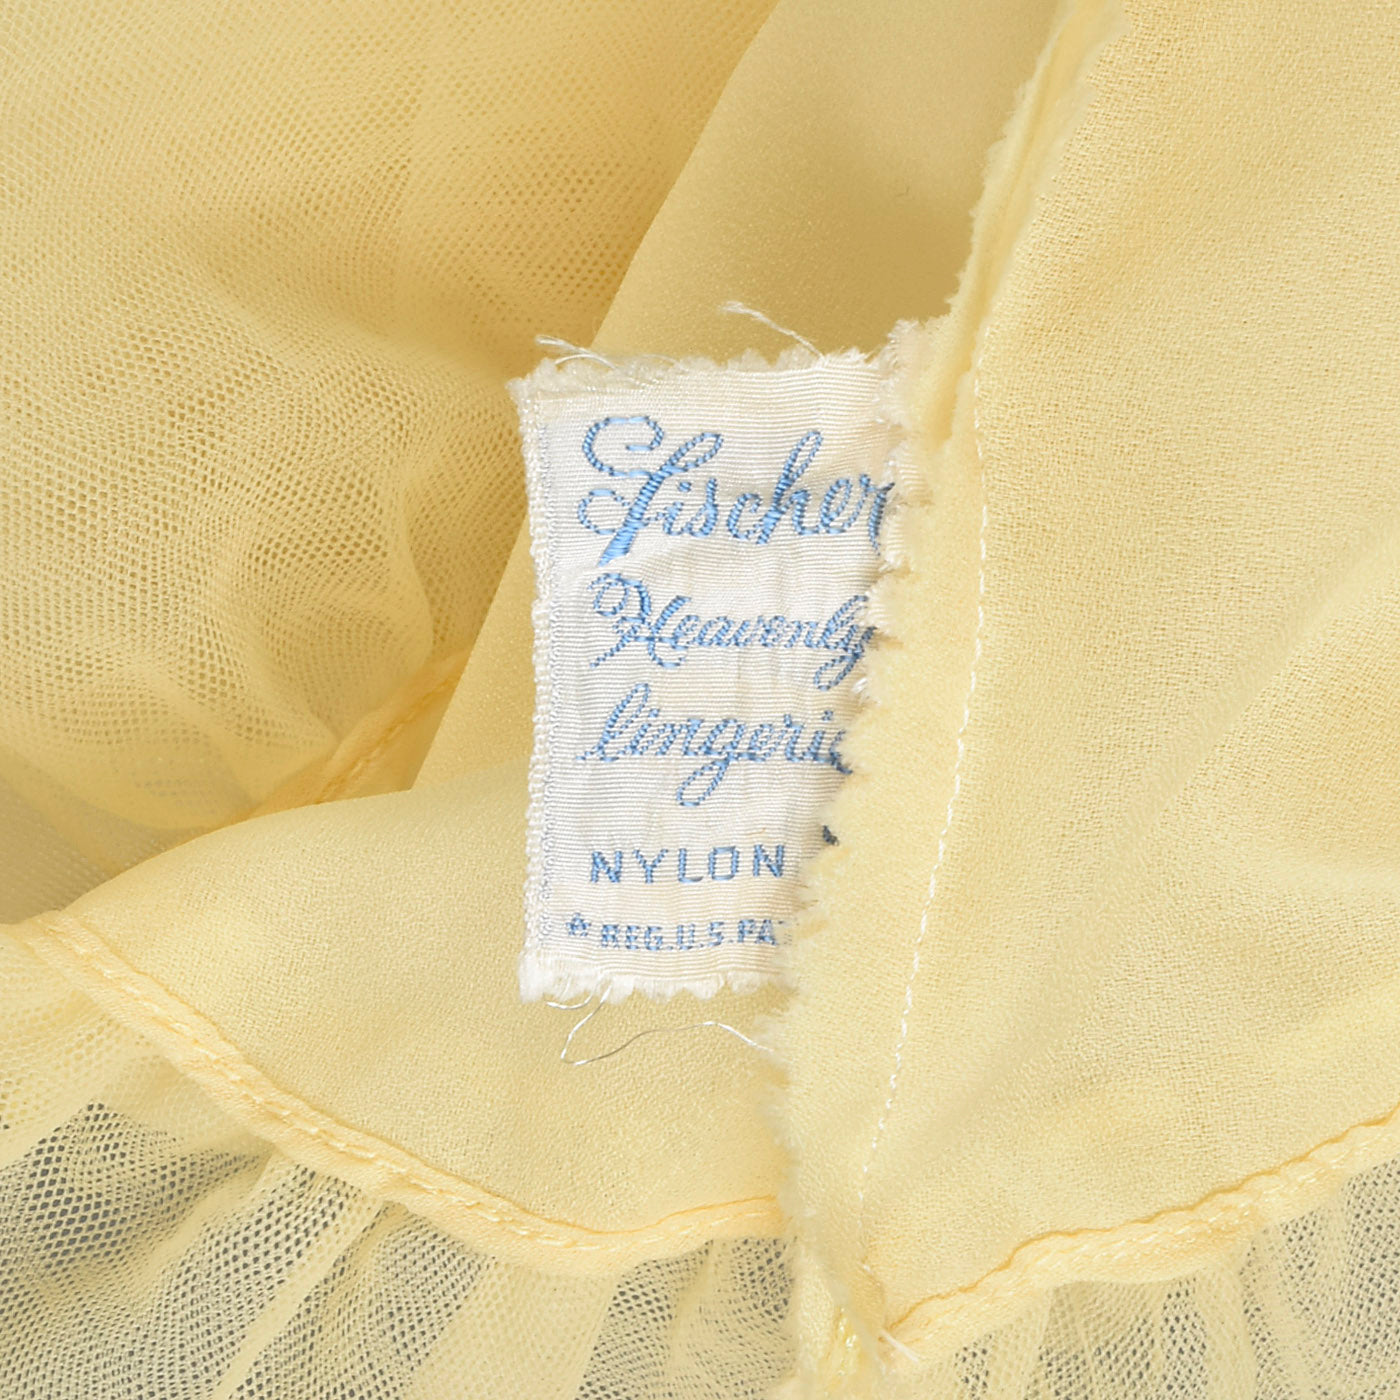 1950s Yellow Nightgown with Ruffled Bust